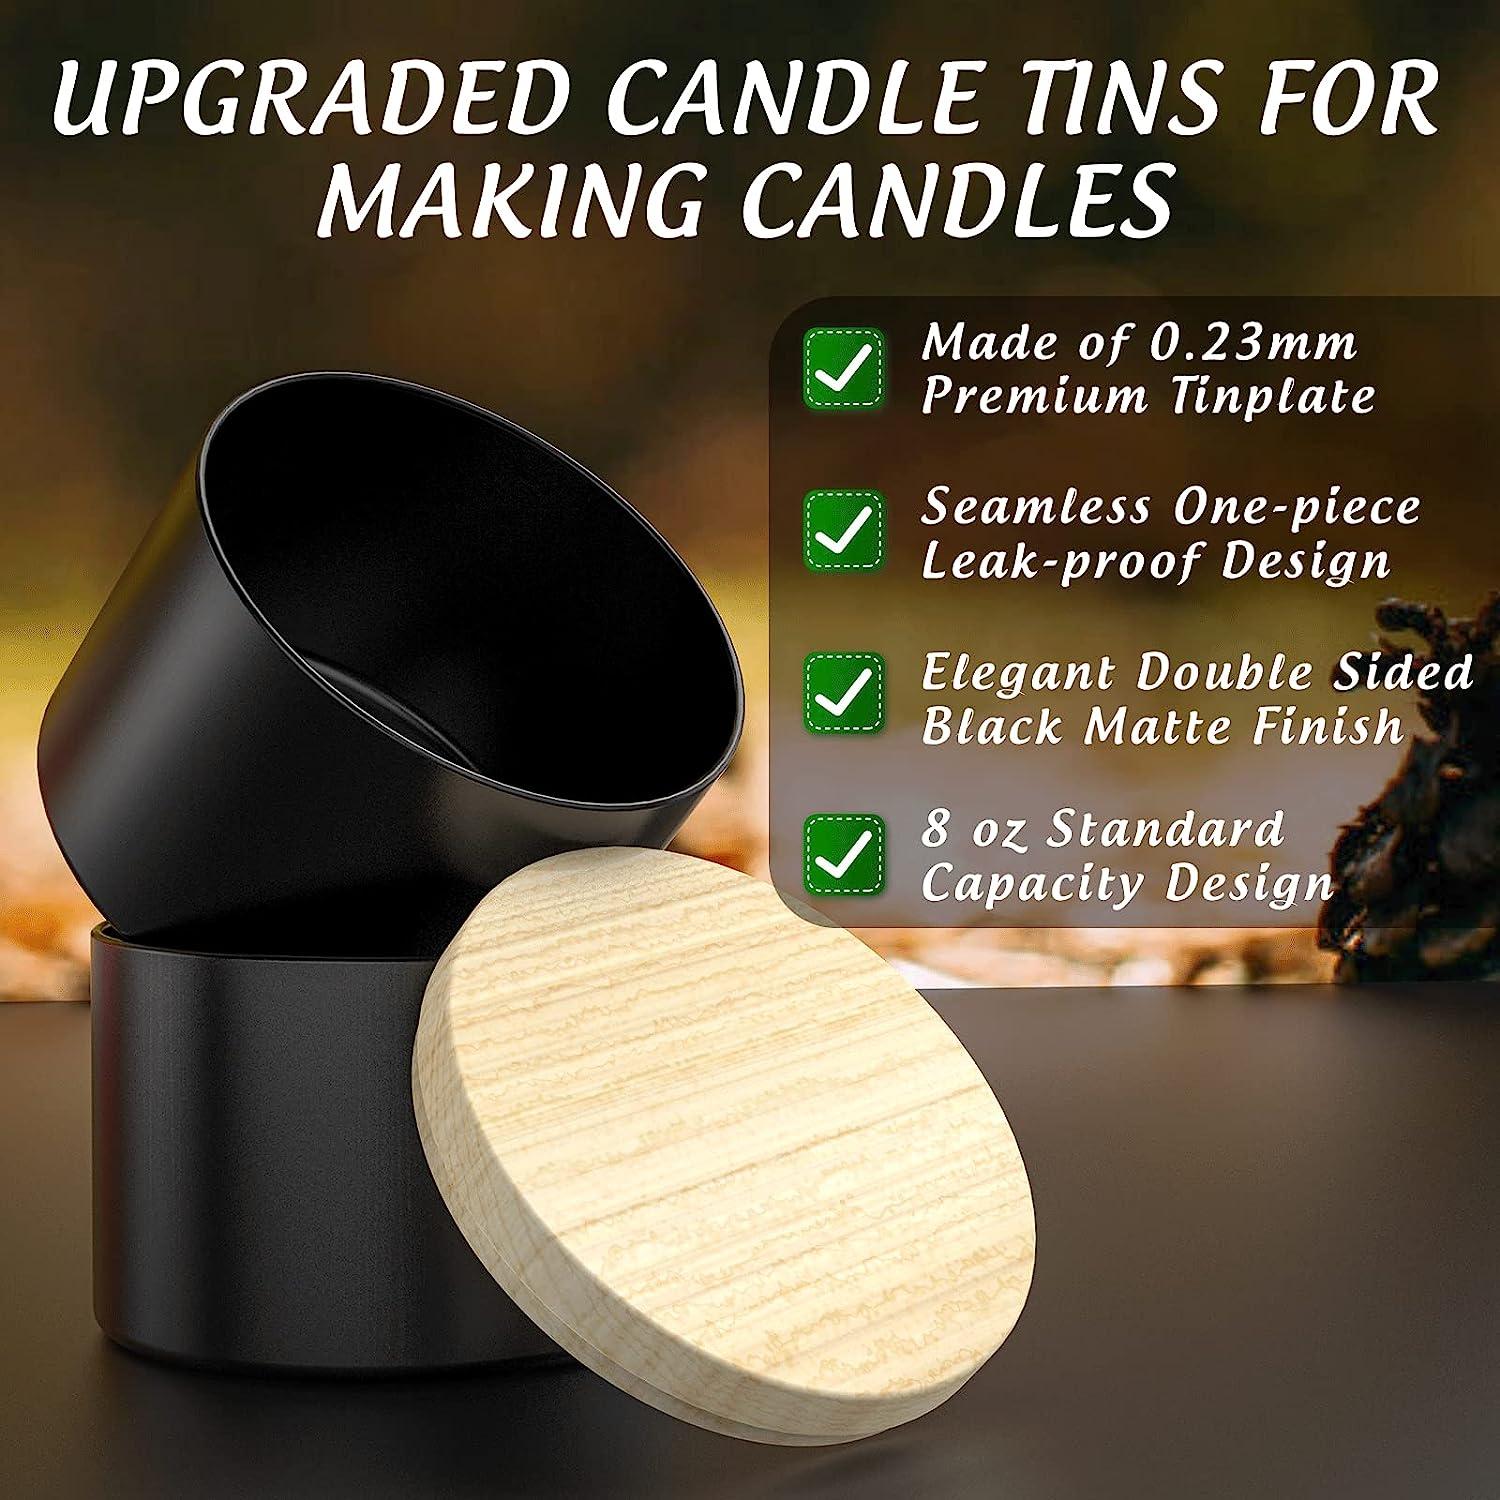 Upgraded 24 Pack Candle Tins 8 oz with Lids, Bulk Empty Candle Jars for Making Candles, Premium Metal Candle Containers, Round Candle Vessels Kit for